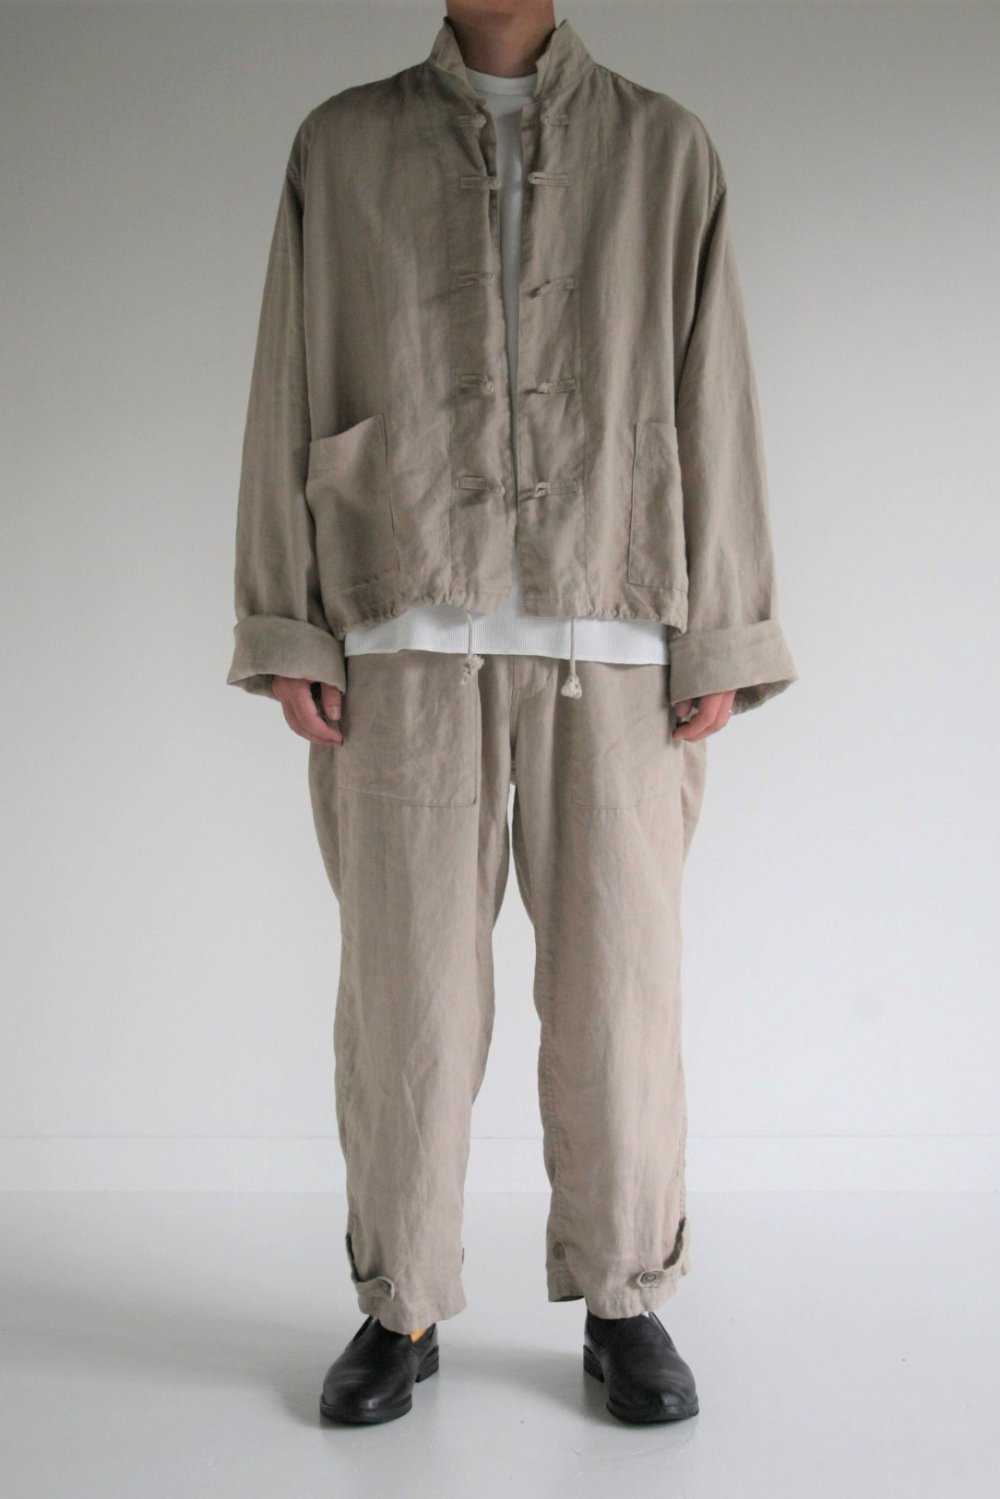 ANACHRONORM “ROLL UP SLEEVES CHINA COVERALL SHIRTS” - Tribeca